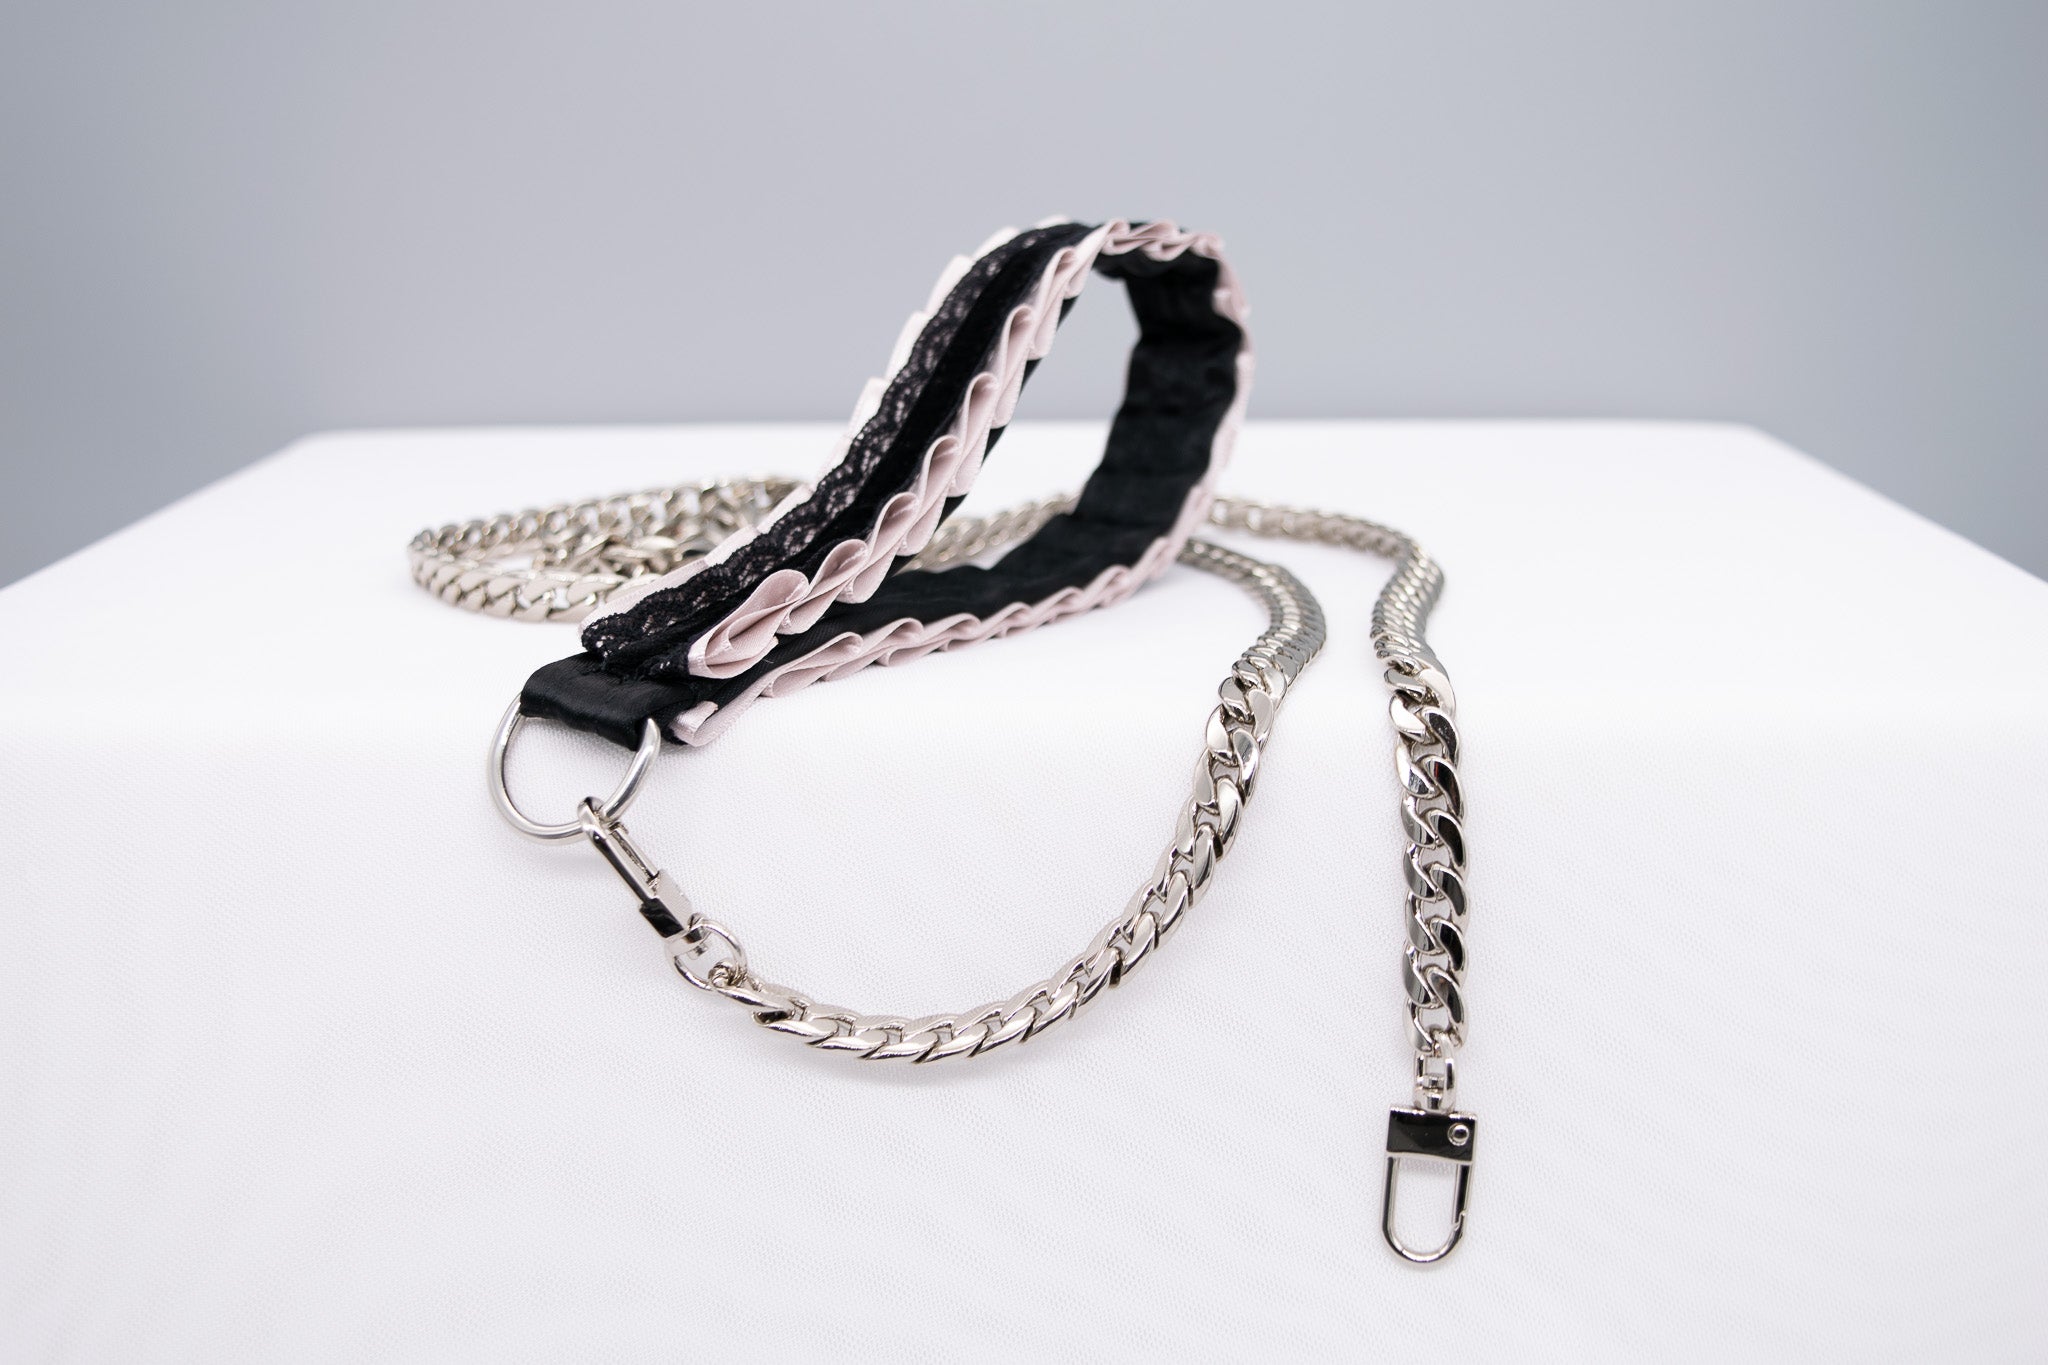 Dusty Lilac and Black Velvet Collar and Leash BDSM Set